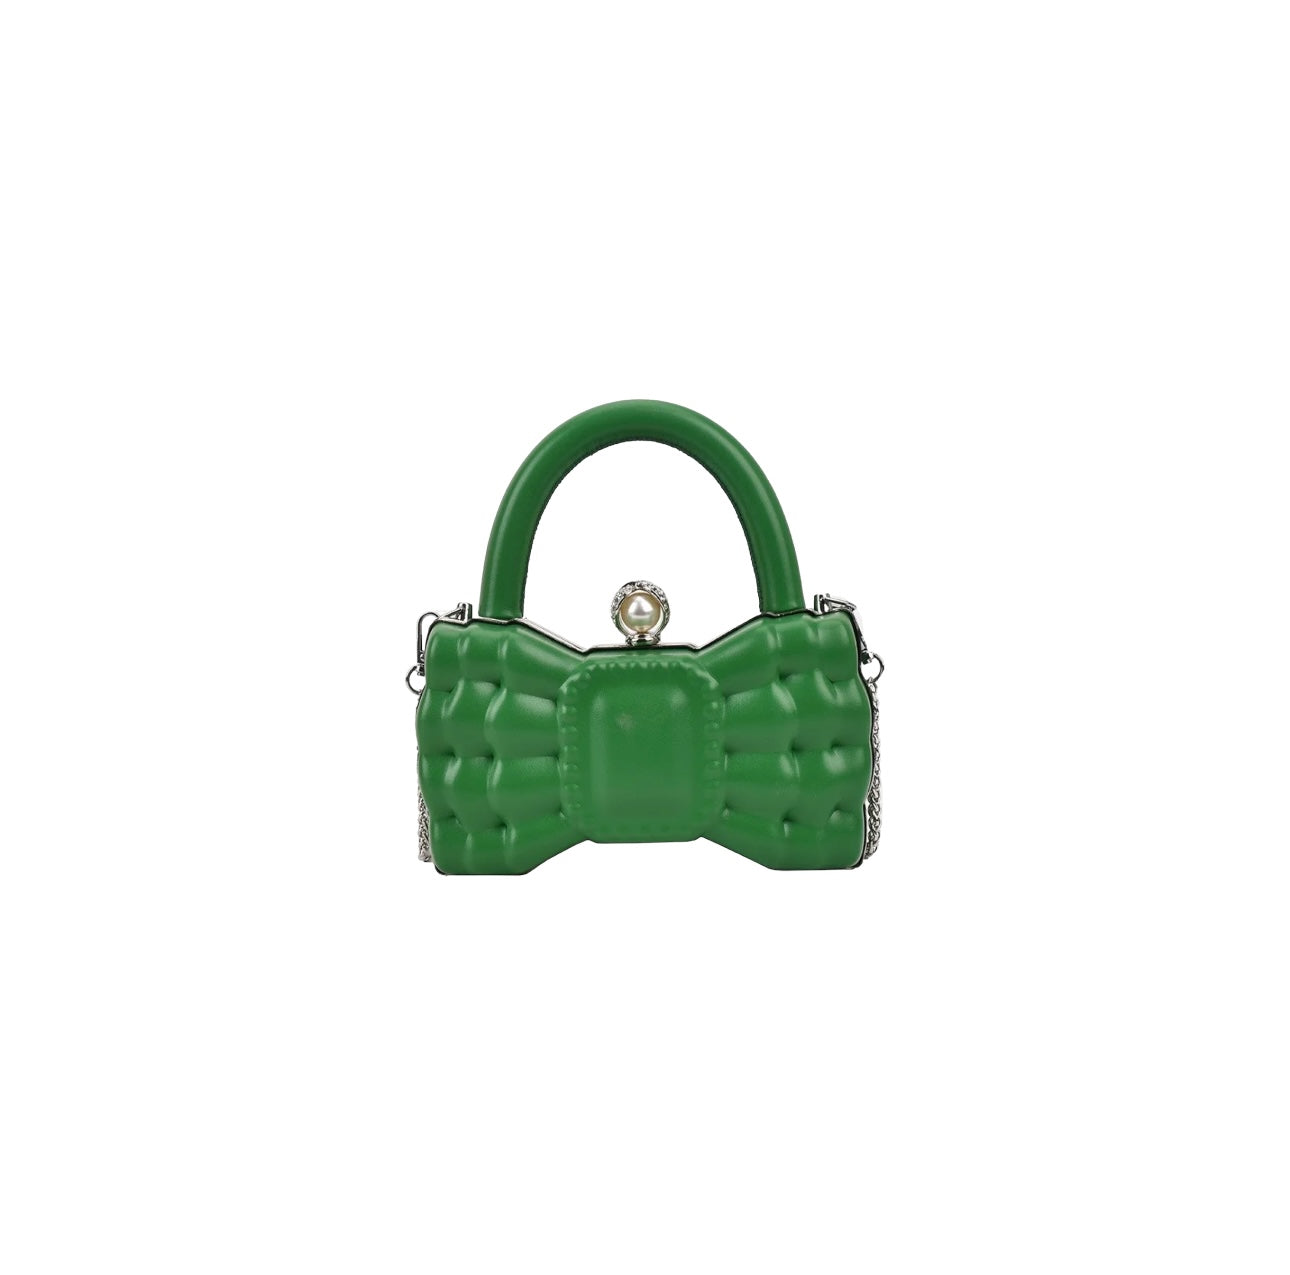 Bow Coquette Hand Bag - 